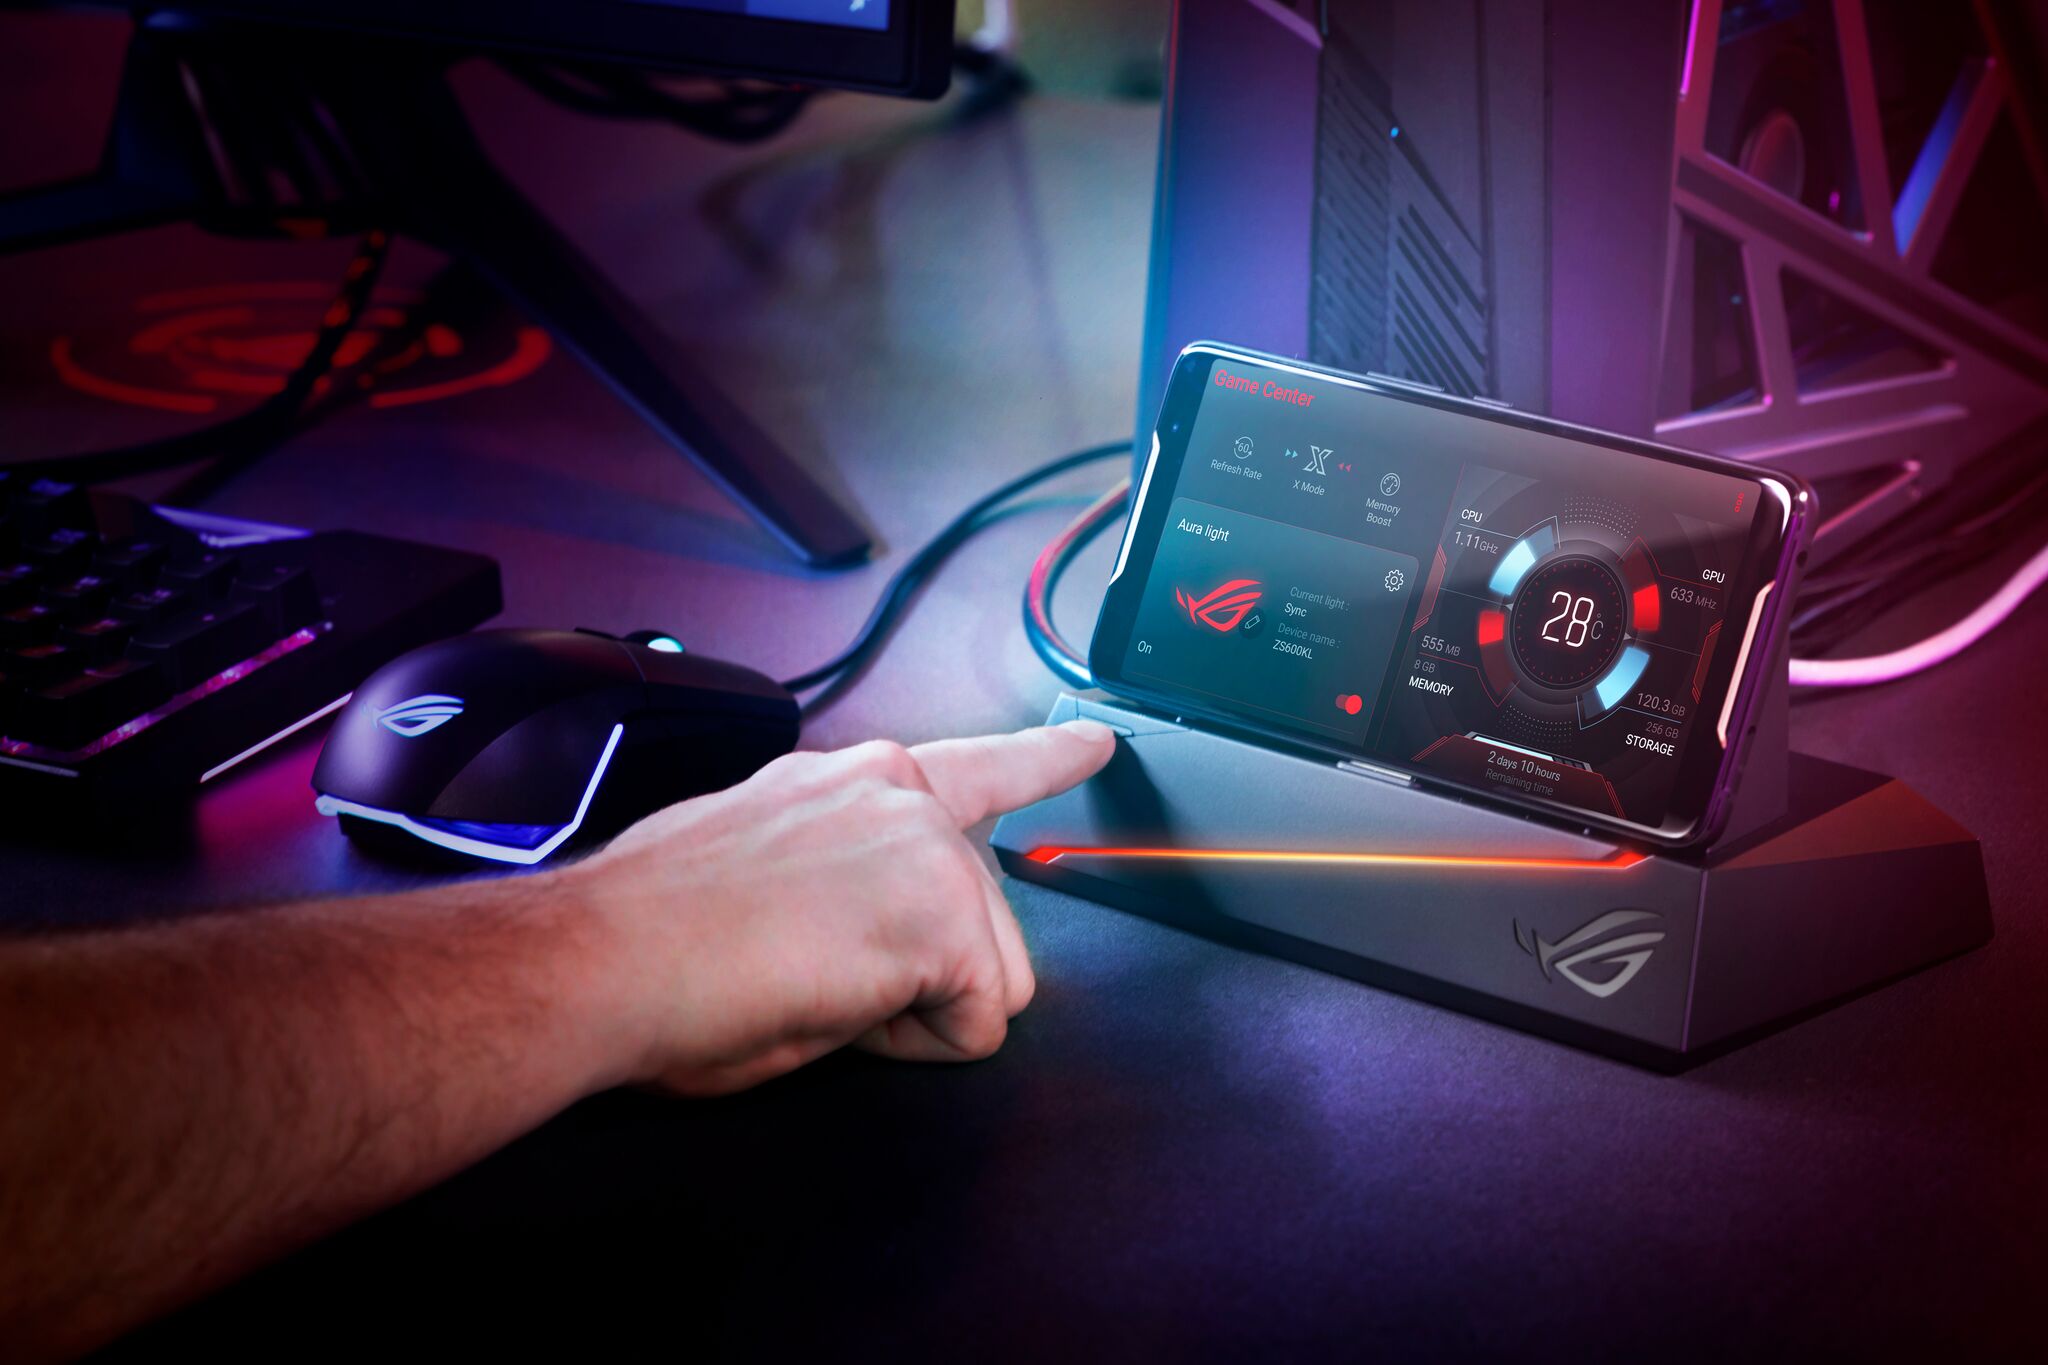 Asus Rog gaming phone being used with a PC setup.